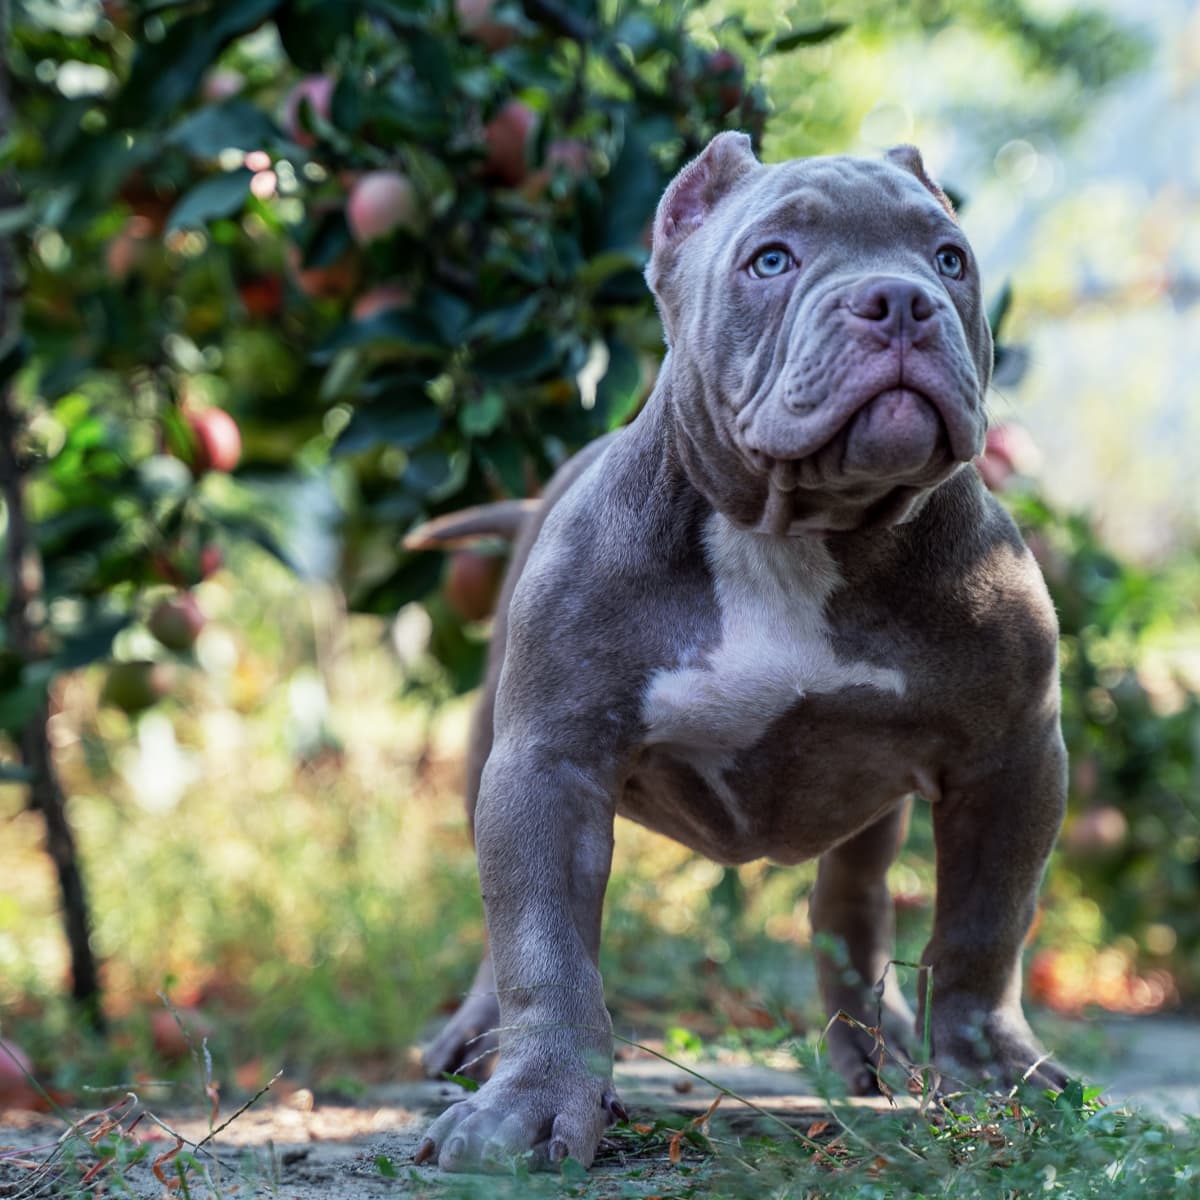 Abkc Registered Amazing Lilac Tri Pocket Bully For Stud Only in Leeds LS26  on Freeads Classifieds - American Bully classifieds